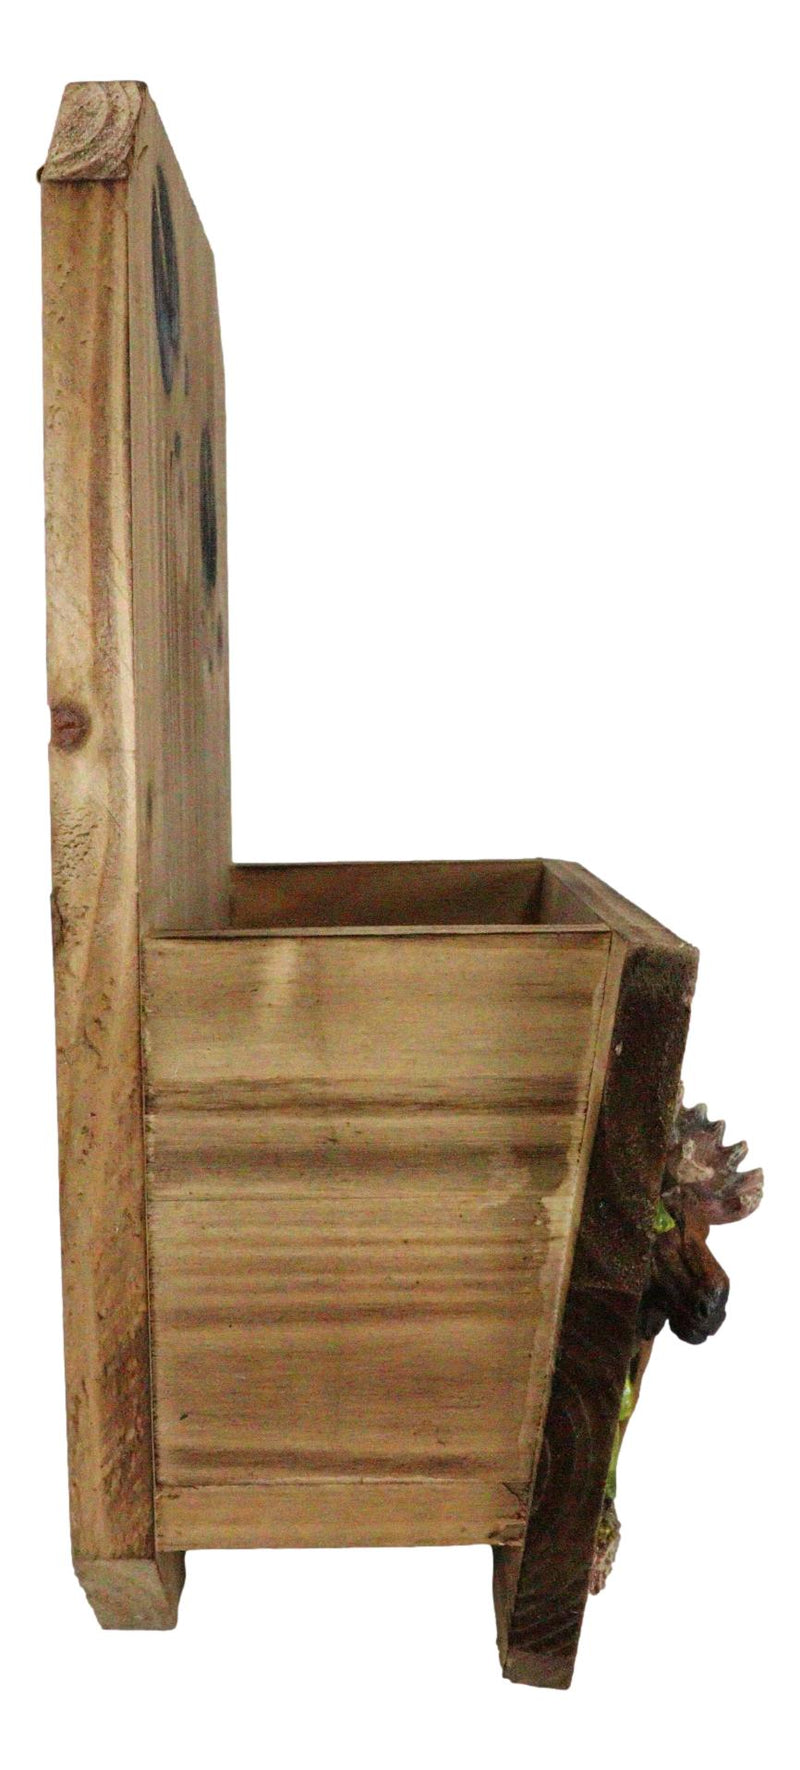 Ebros Western Moose By Pine Trees Forest And Trail Wall Planter Or Mail Holder